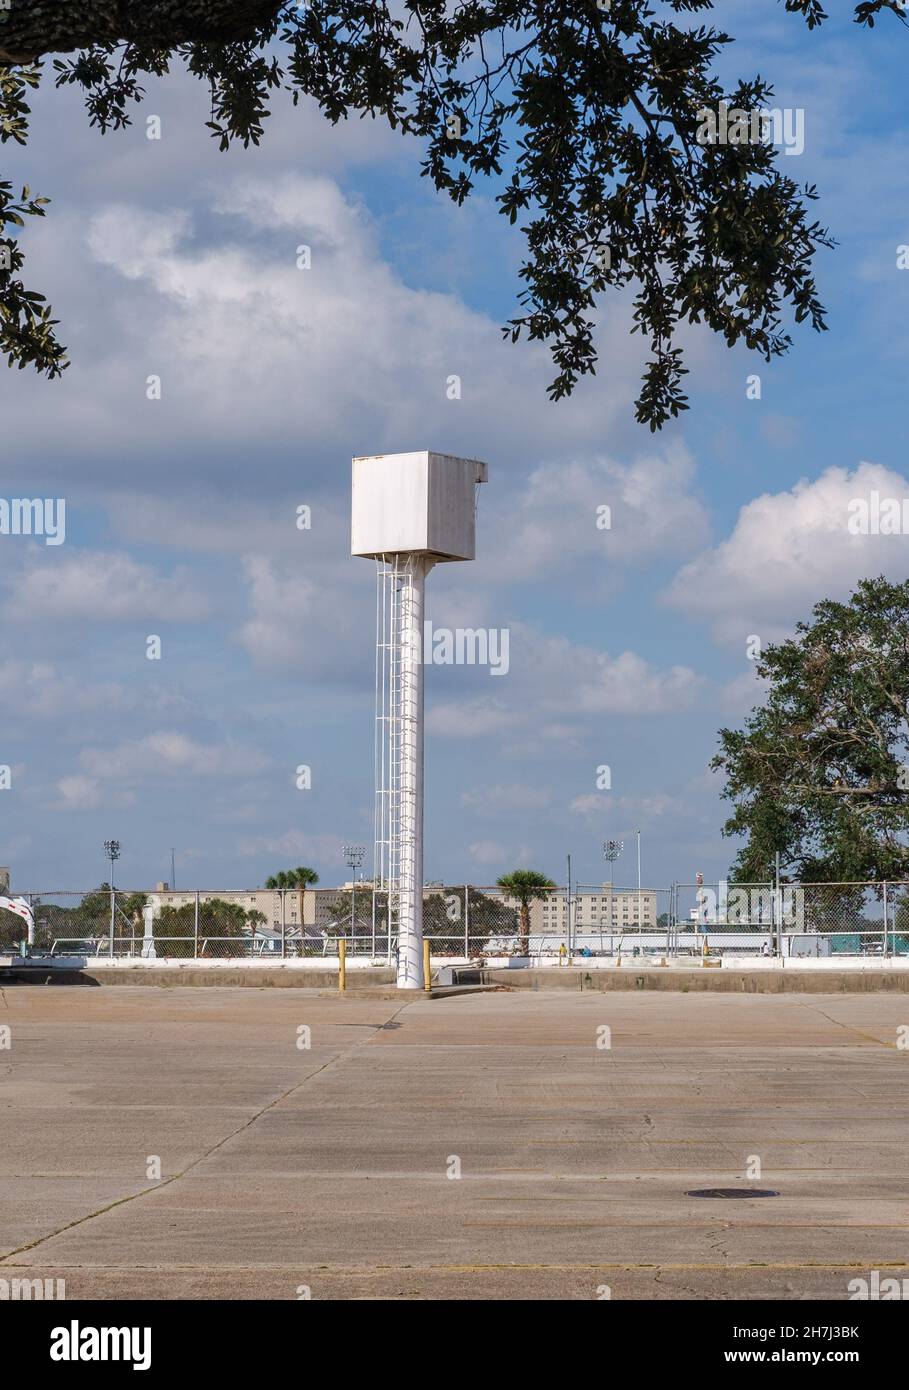 NEW ORLEANS, LA, USA - OCTOBER 23, 2021: Tower at New Orleans Fairgrounds Race Track Stock Photo